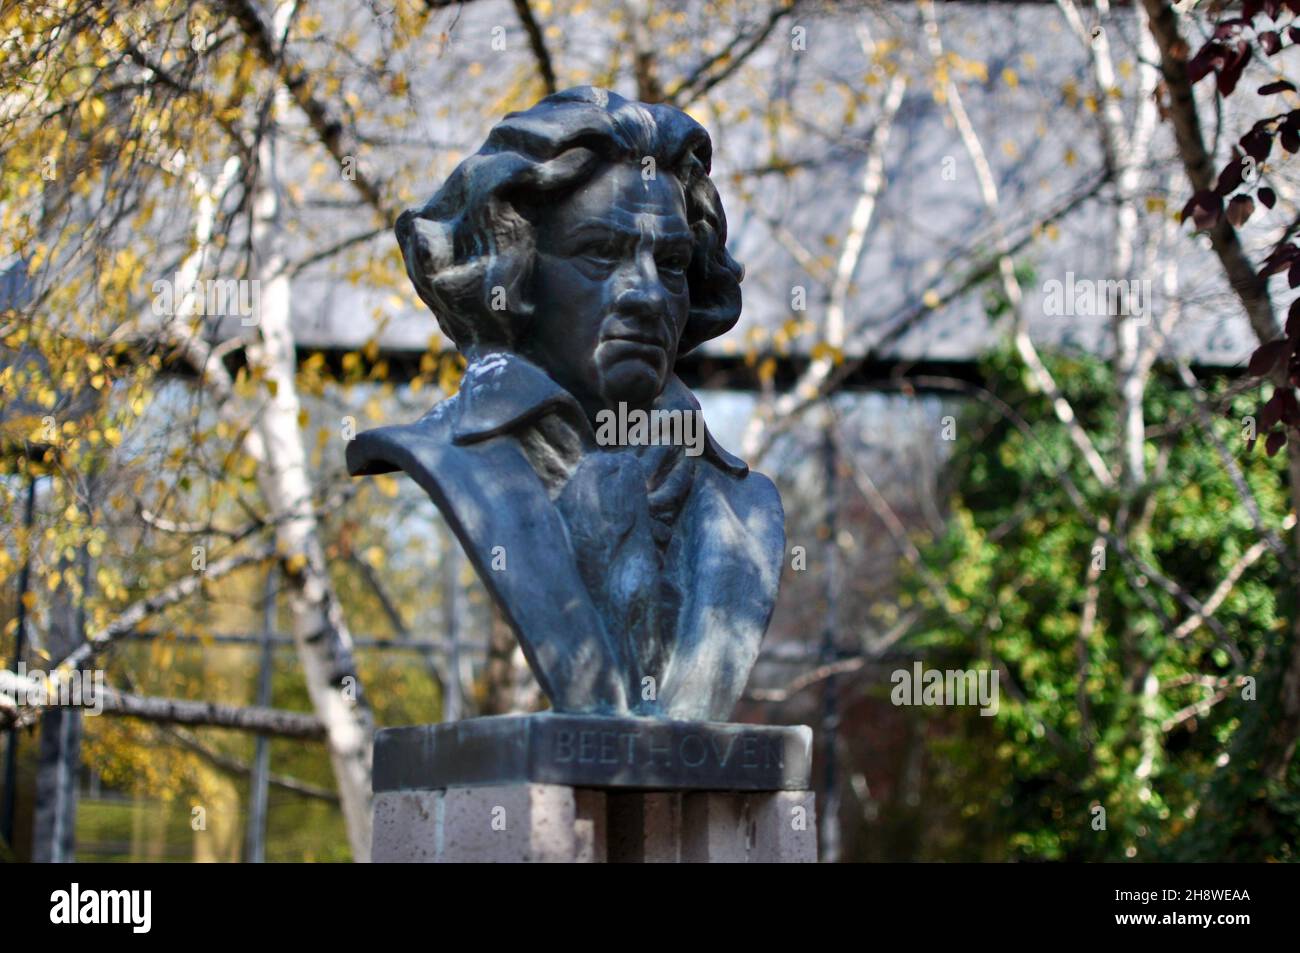 The bronze bust of Beethoven at the METU greenery park. Beethoven is German composer and pianist, one of the most admired composers and bridged Stock Photo